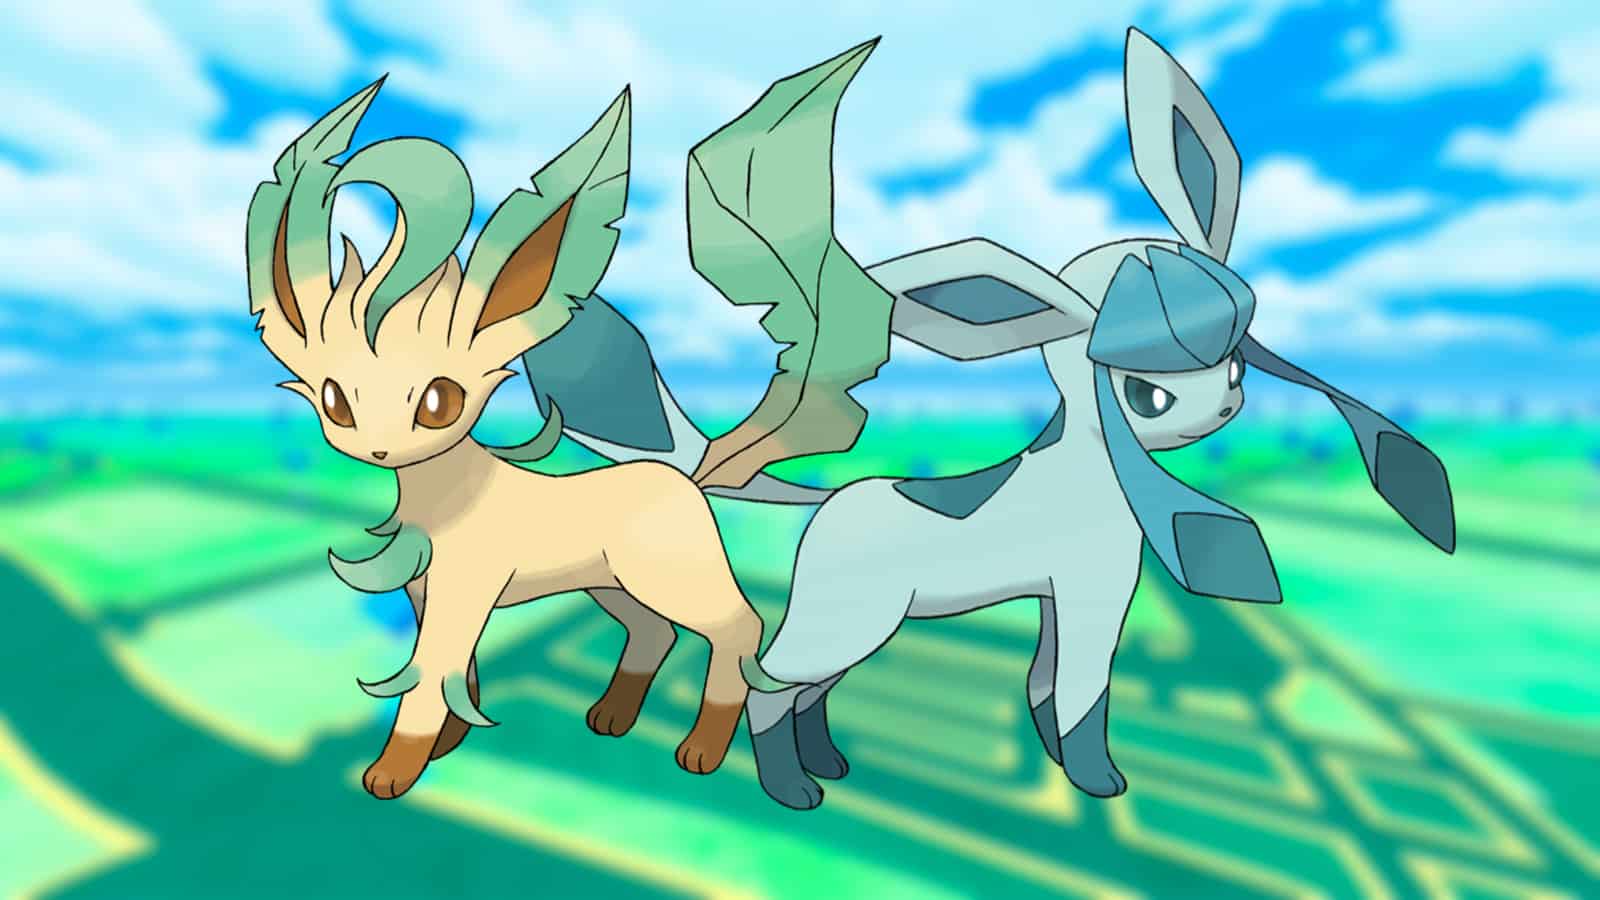 Leafeon and Glaceon, Eevee's evolutions in Pokemon